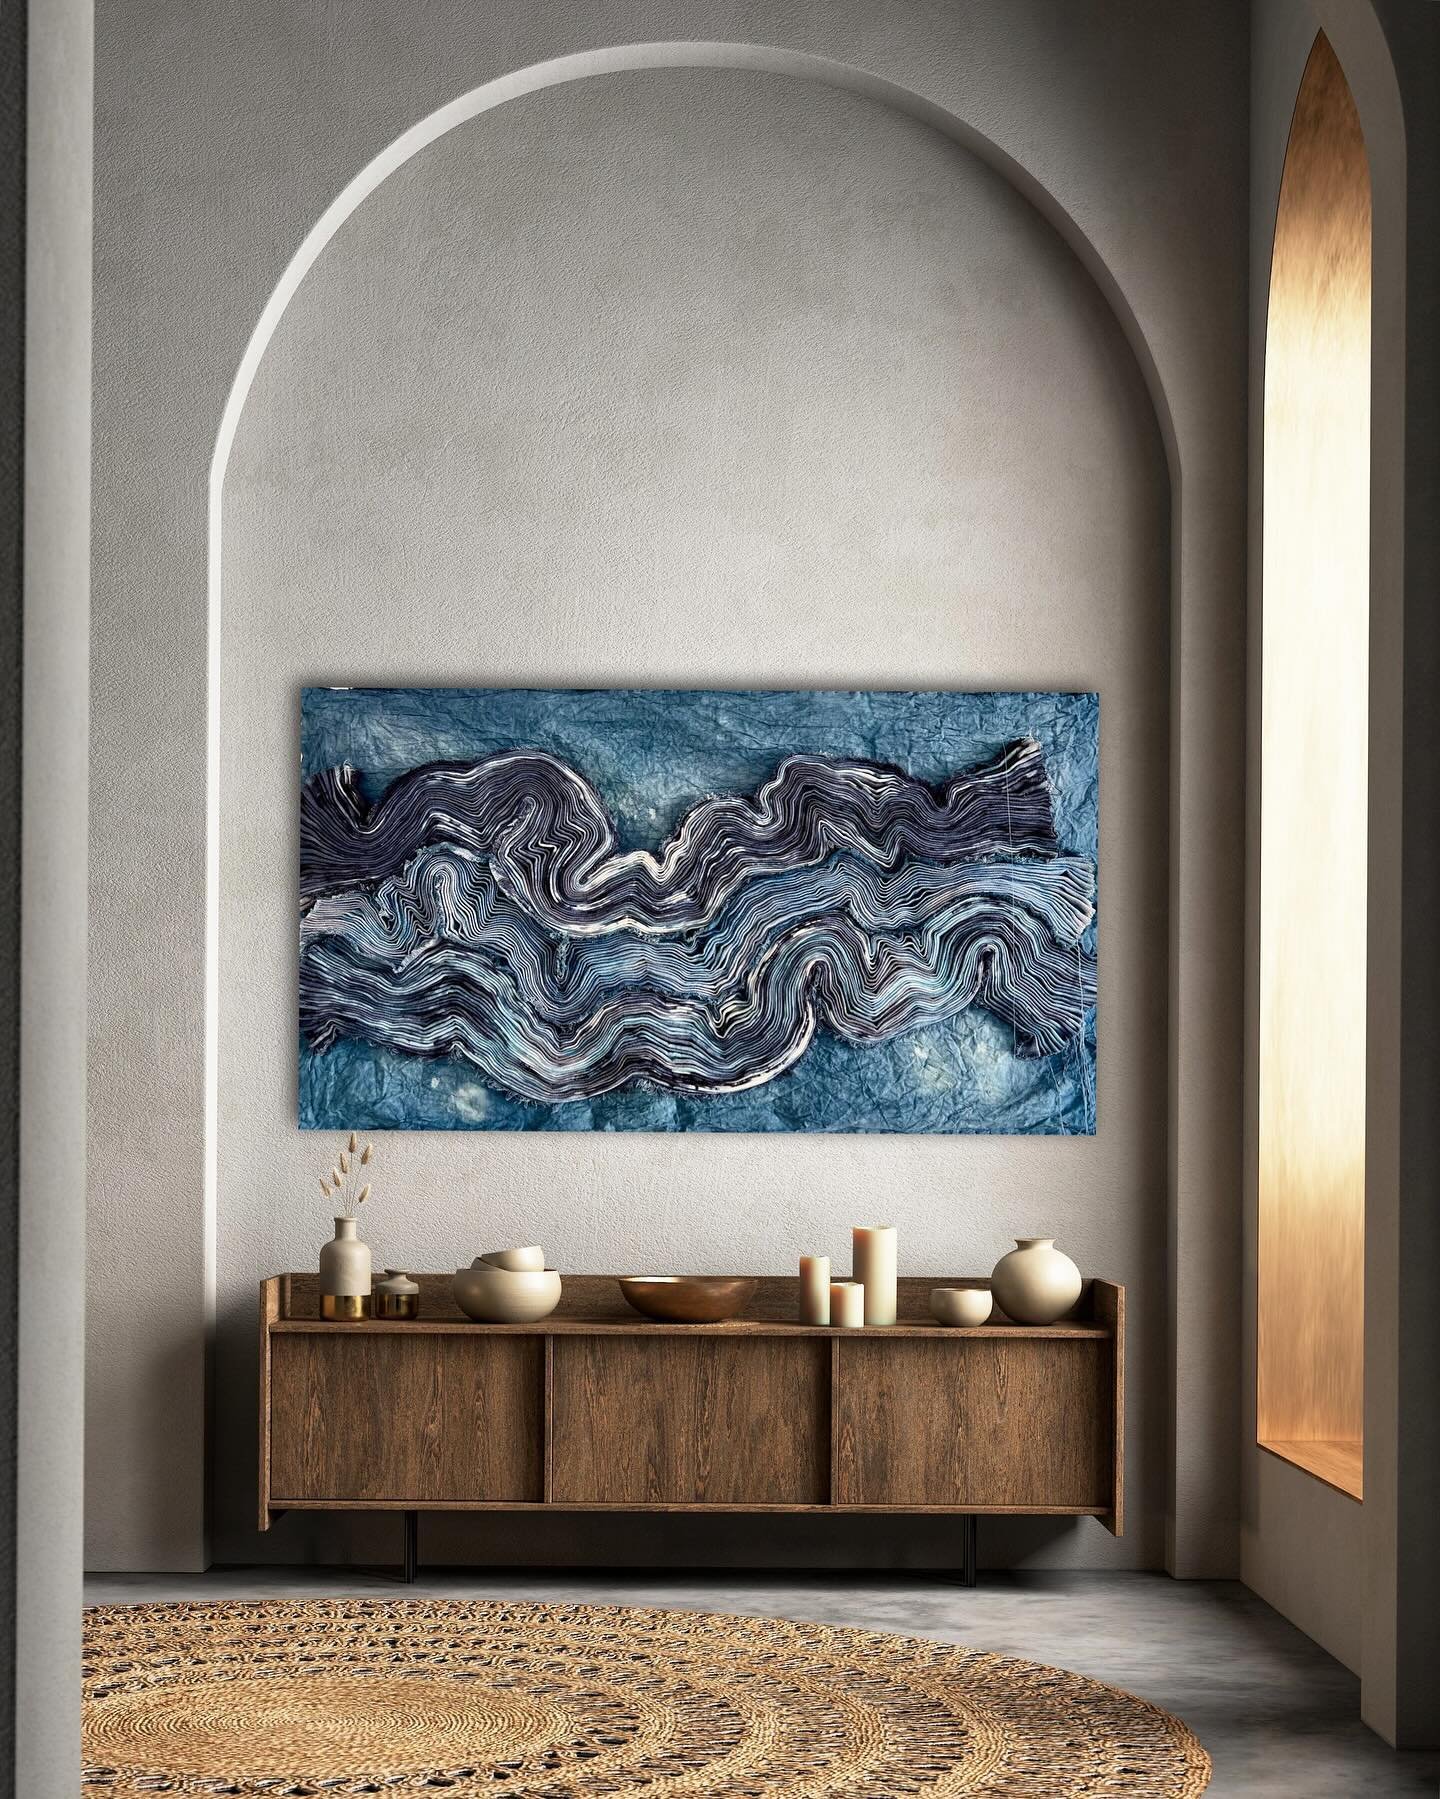 Islands Meet The Sea
Fiber Sculpture

34&rdquo;L x 61&rdquo;W 

Out Of The Blue Collection

Cotton &bull; Canvas &bull; Wood Cleat

The Out Of The Blue Collection is influenced strongly by the colors, shapes and textures of the natural world. Rooted 